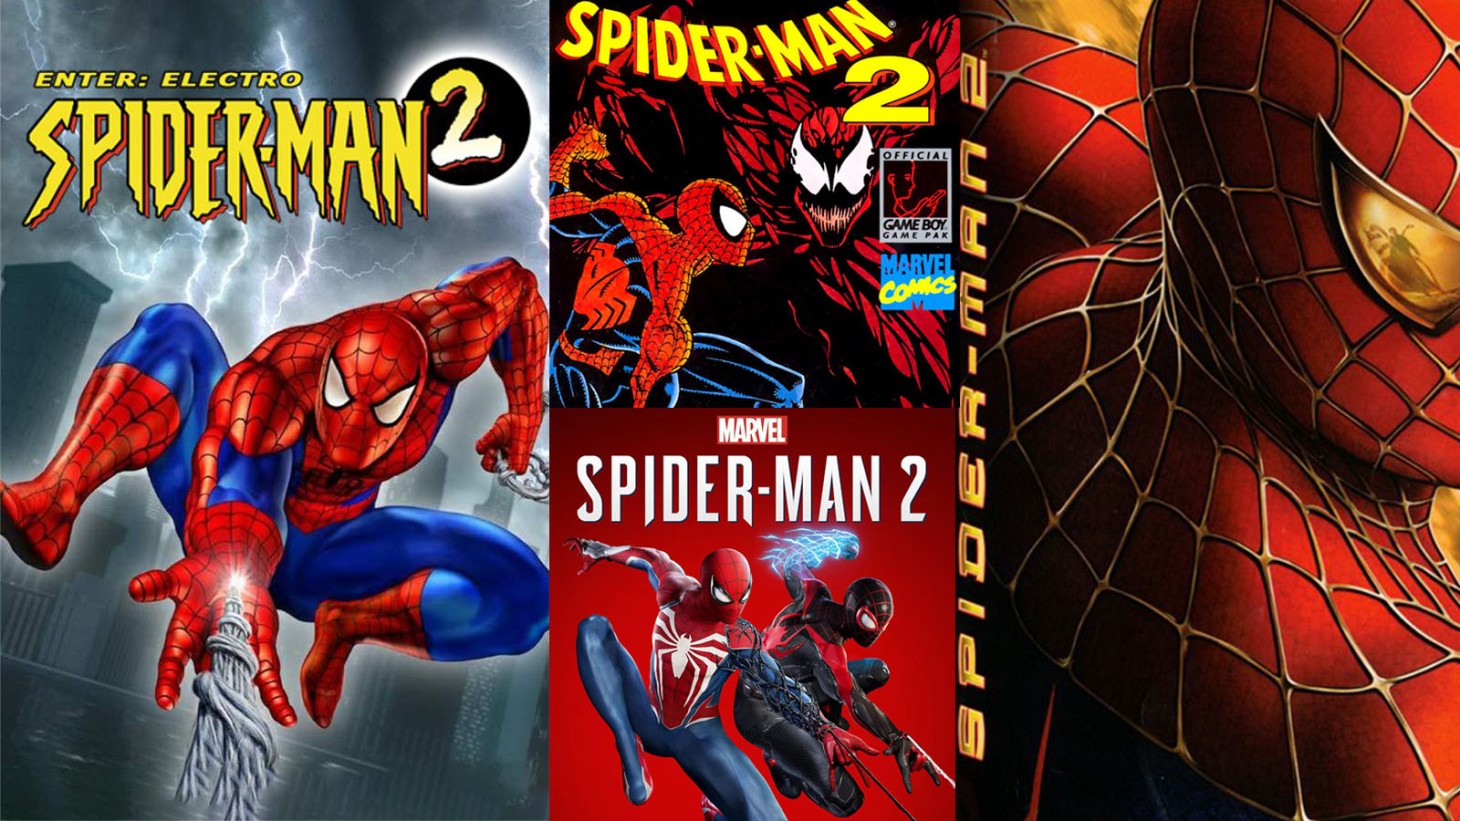 The web-slinger has had so many video games (and series of games) that he's  racked up an alarming number of “Spider-Man 2” games, so with…